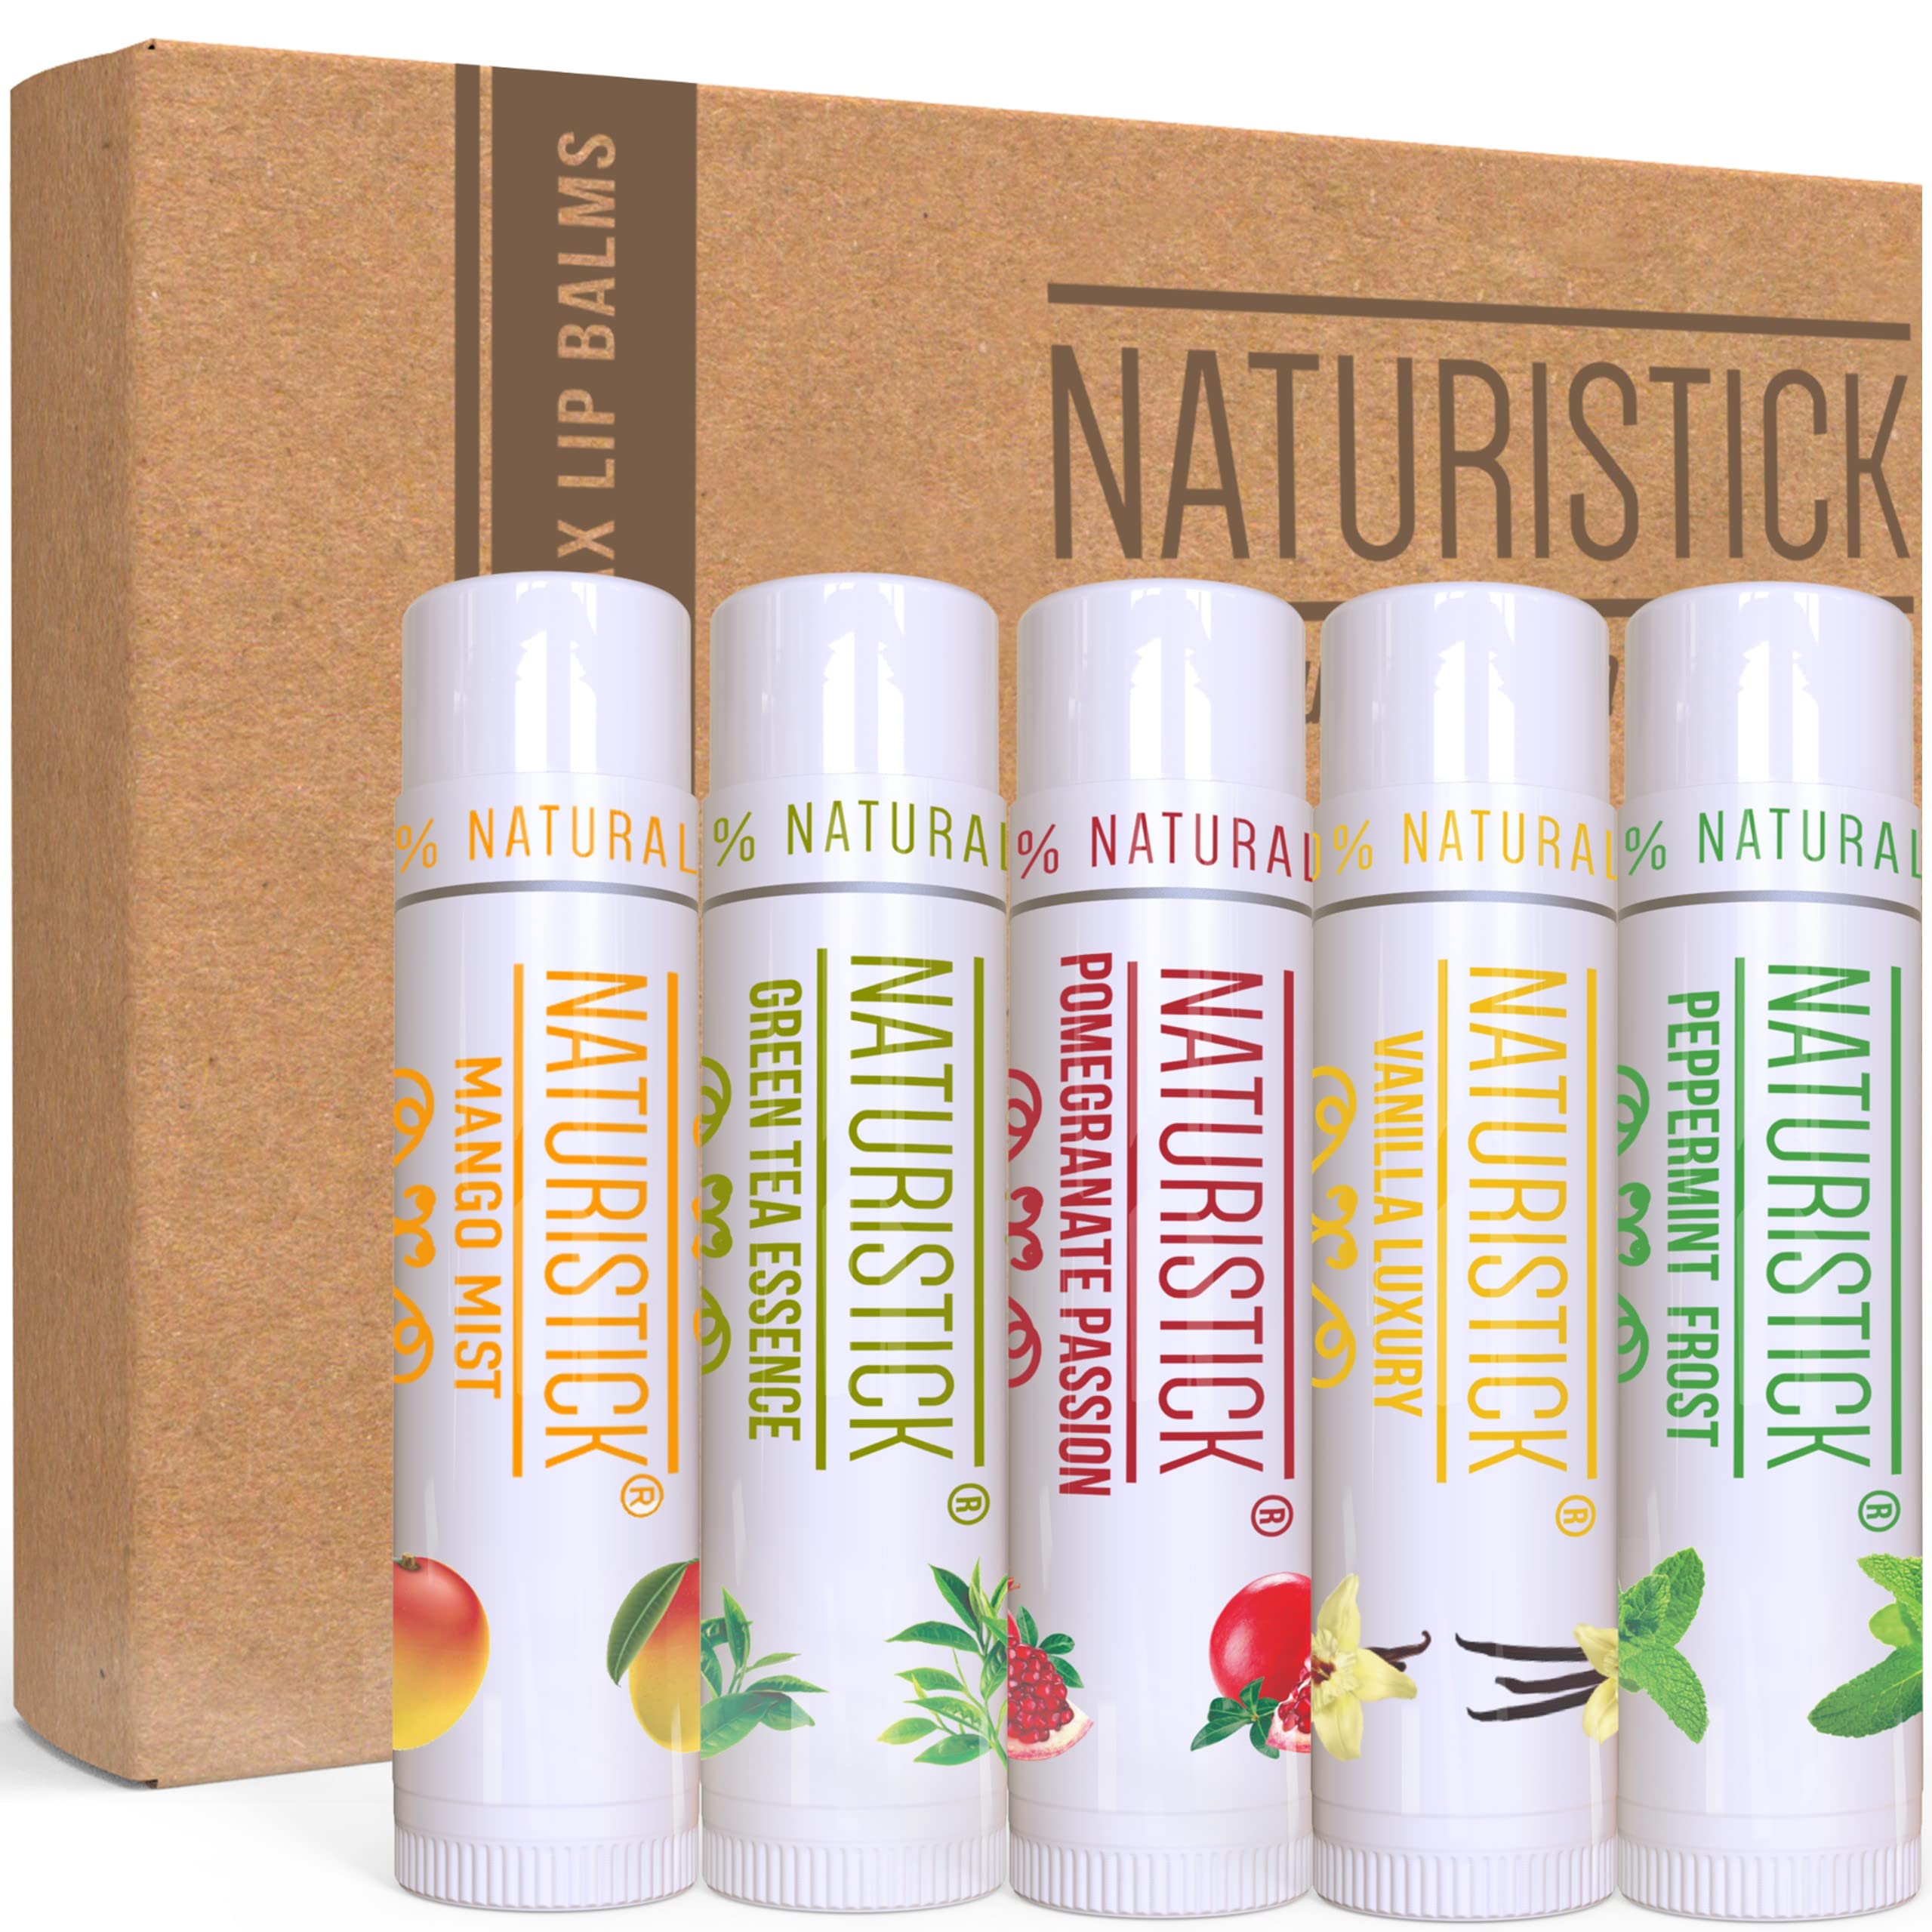 5-Pack Lip Balm Gift Set by Naturistick. Assorted Flavors. 100% Natural Ingredients. Best Beeswax Chapsticks for Dry, Chapped Lips. Made in USA for Men, Women and Children